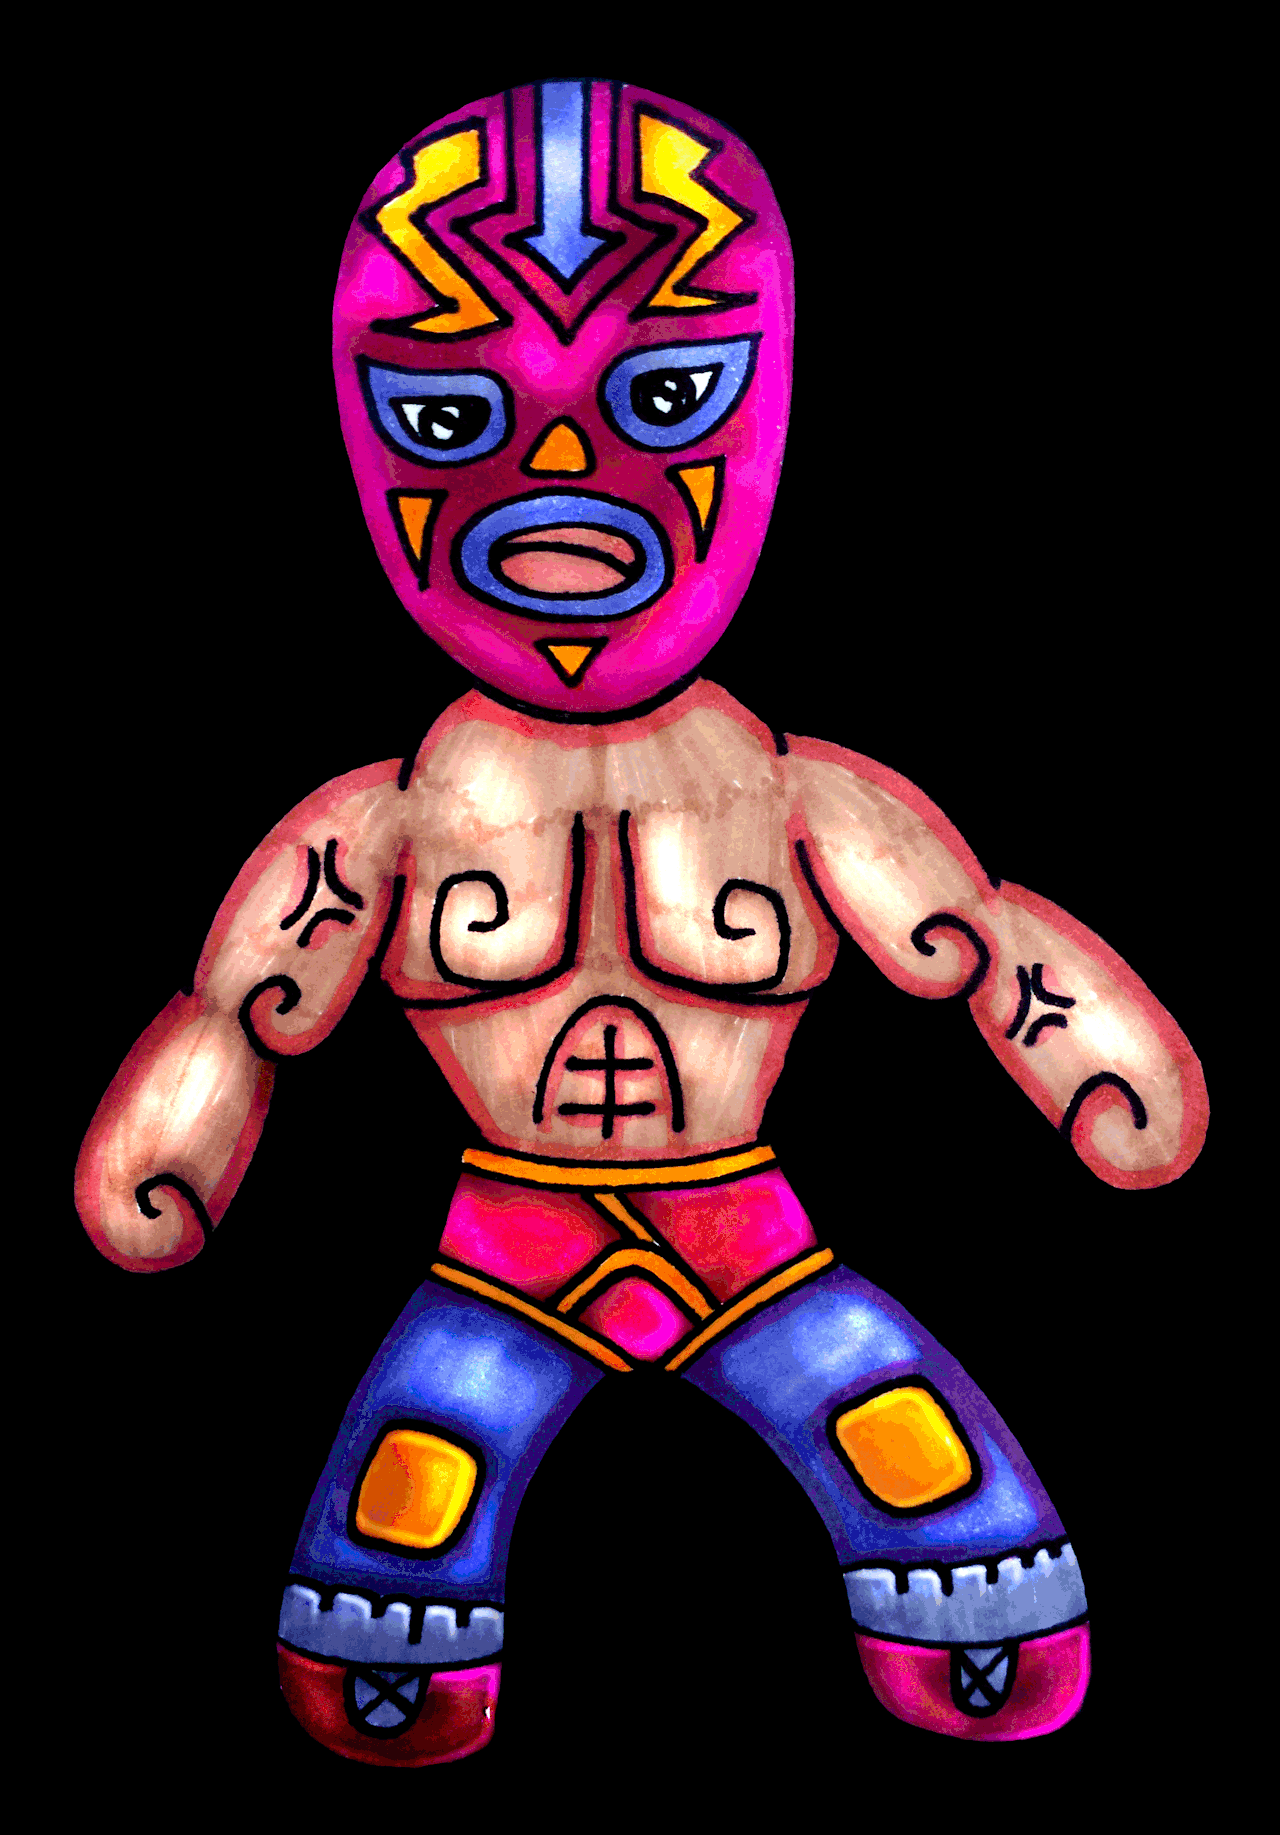 mexican,luchador,illustration,cool,ink,back up and cut the bullshit,wrestle